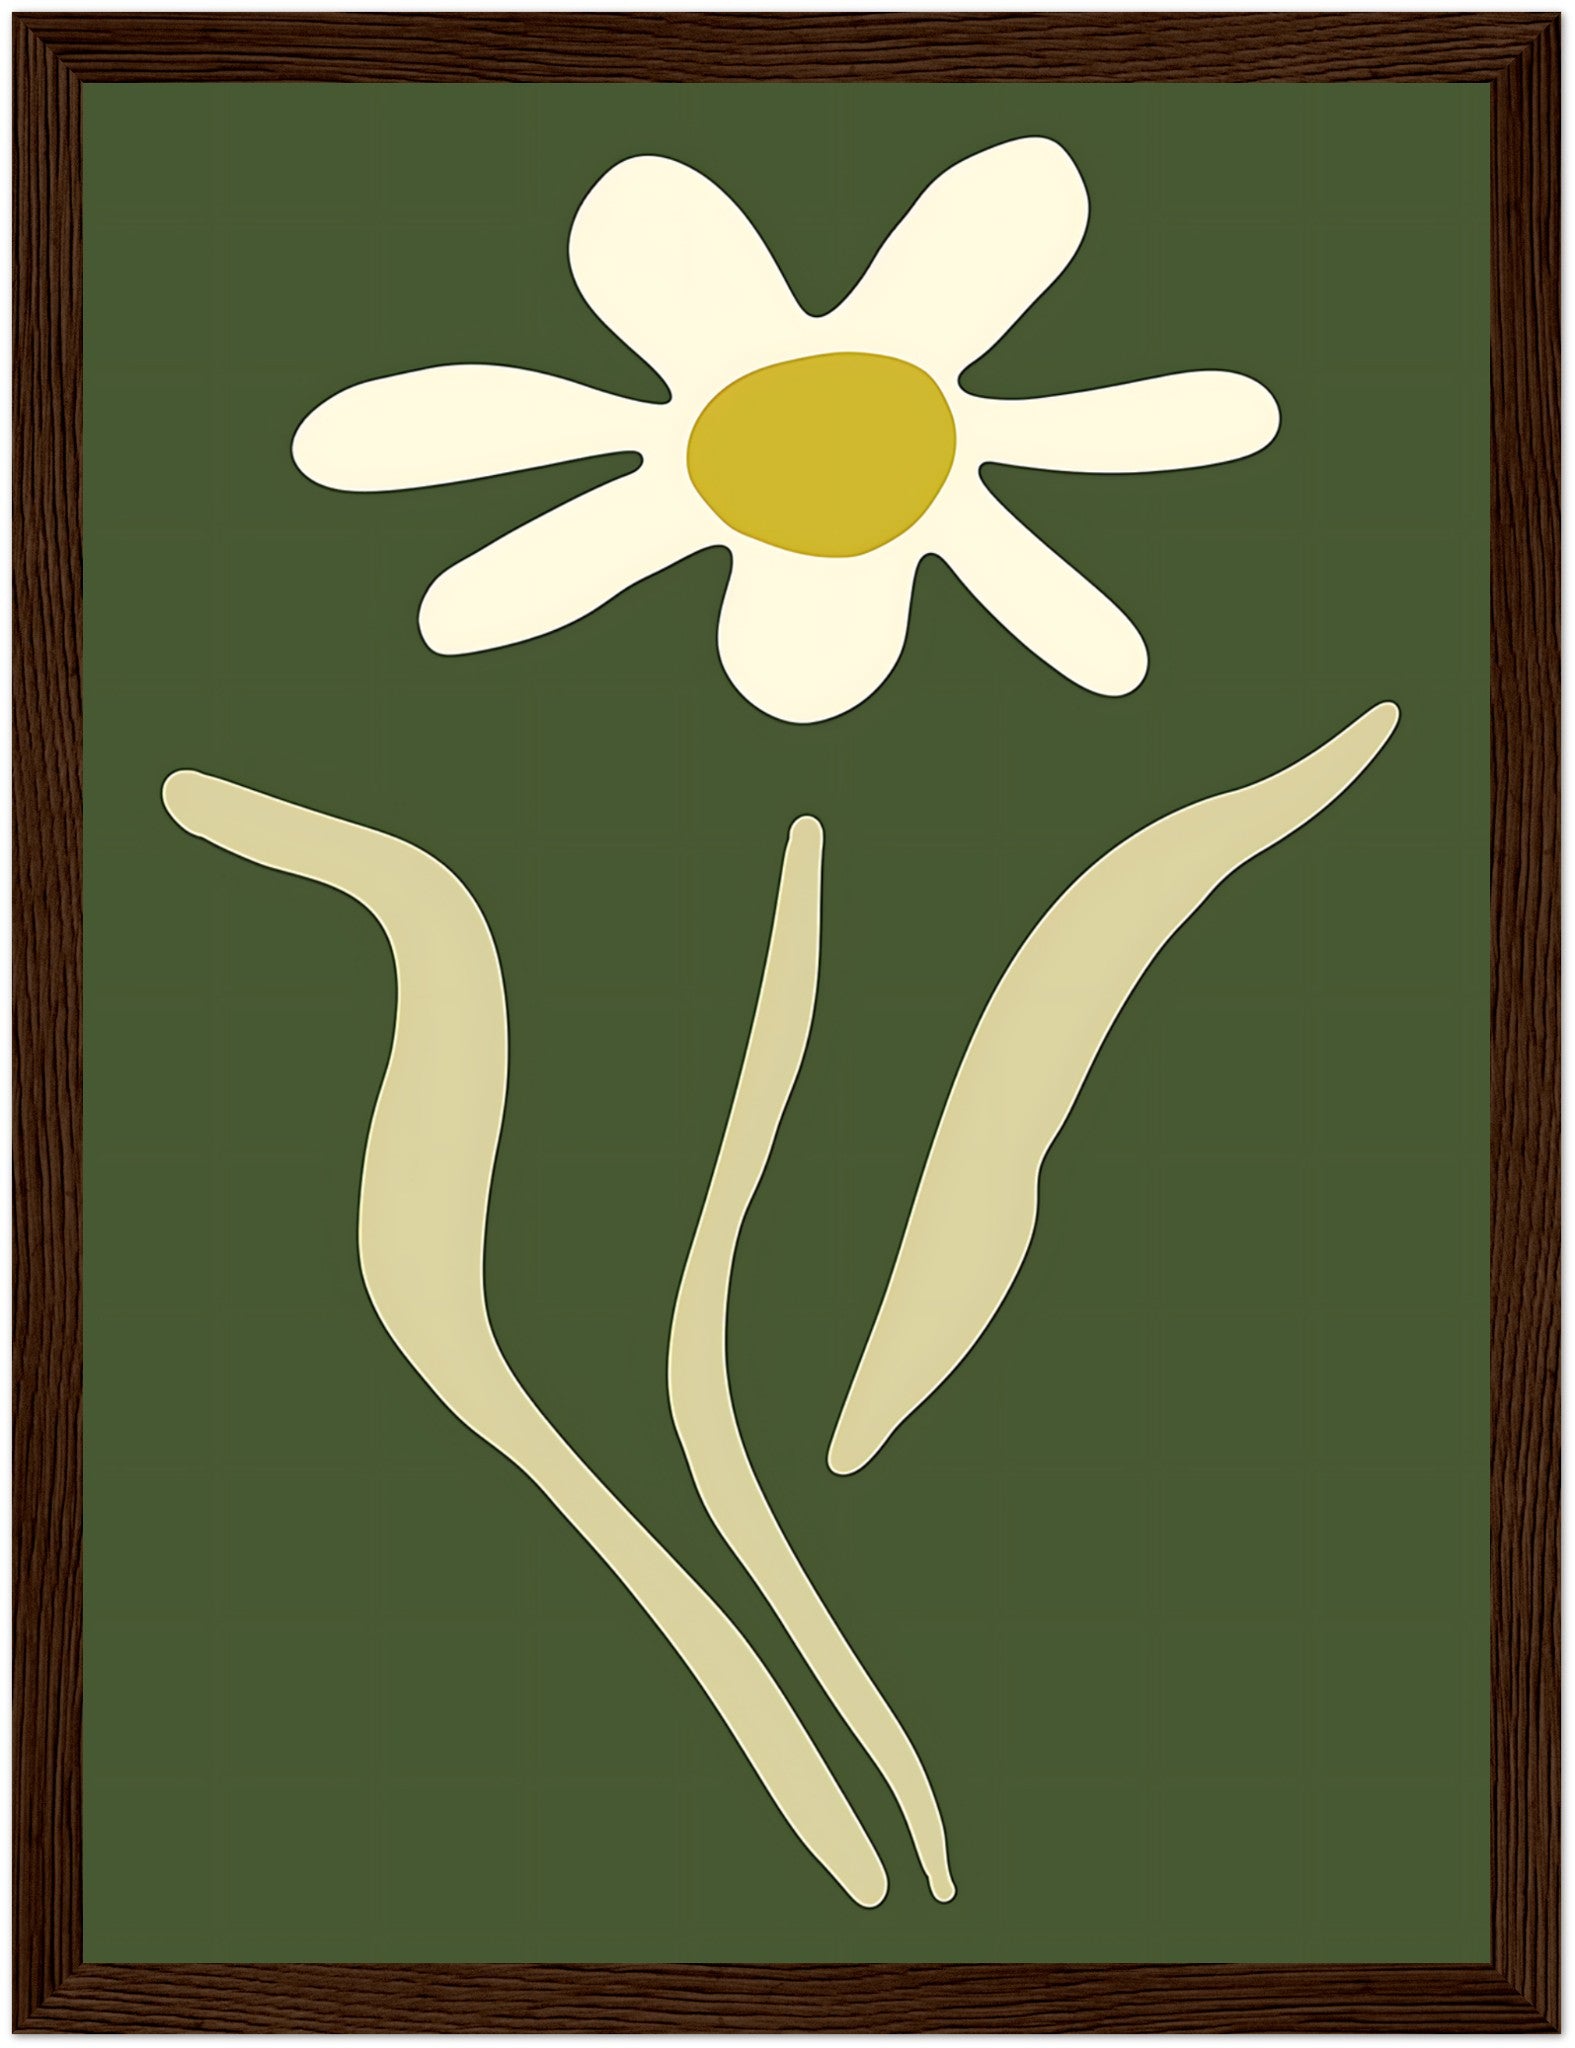 A stylized image of a white daisy with a yellow center on a green background, framed with a brown border.